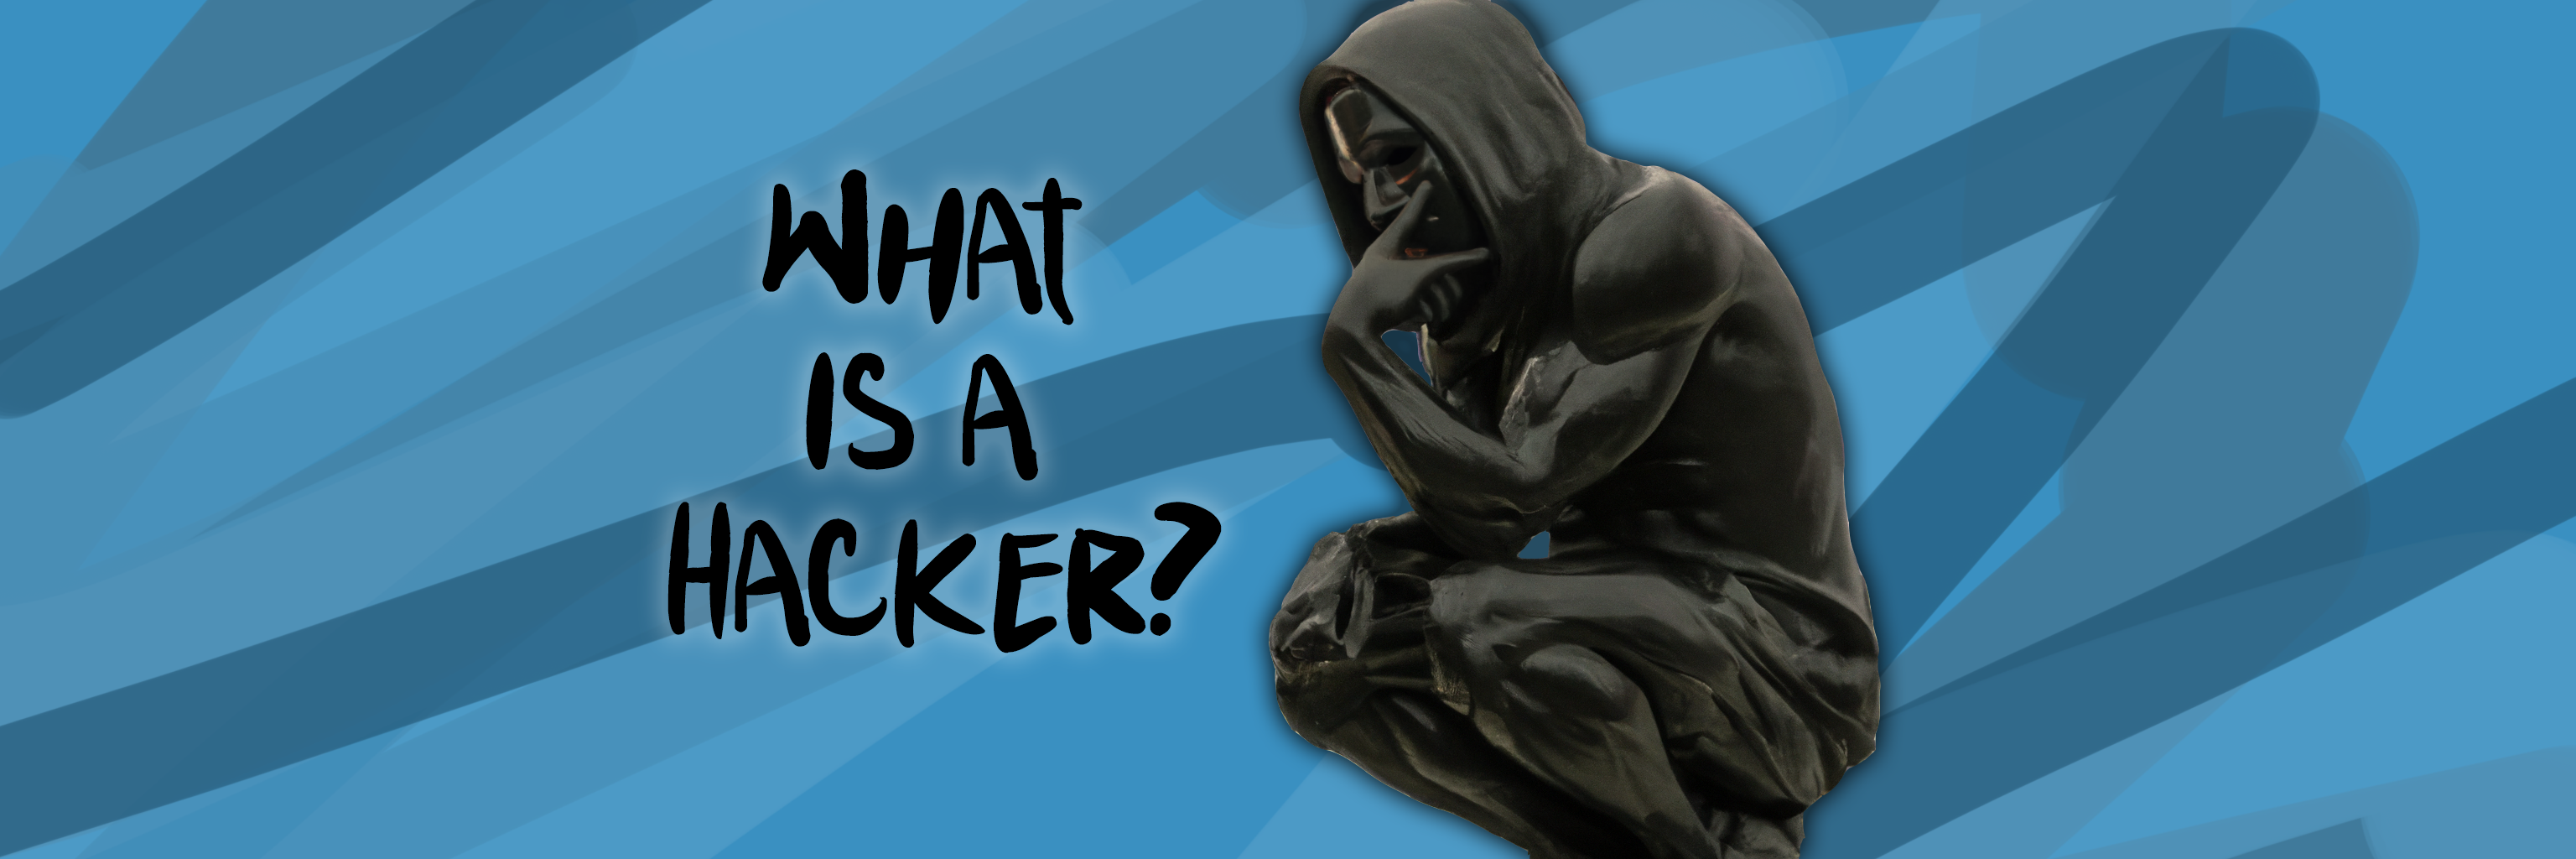 What is a hacker next to a hacker thinker statue